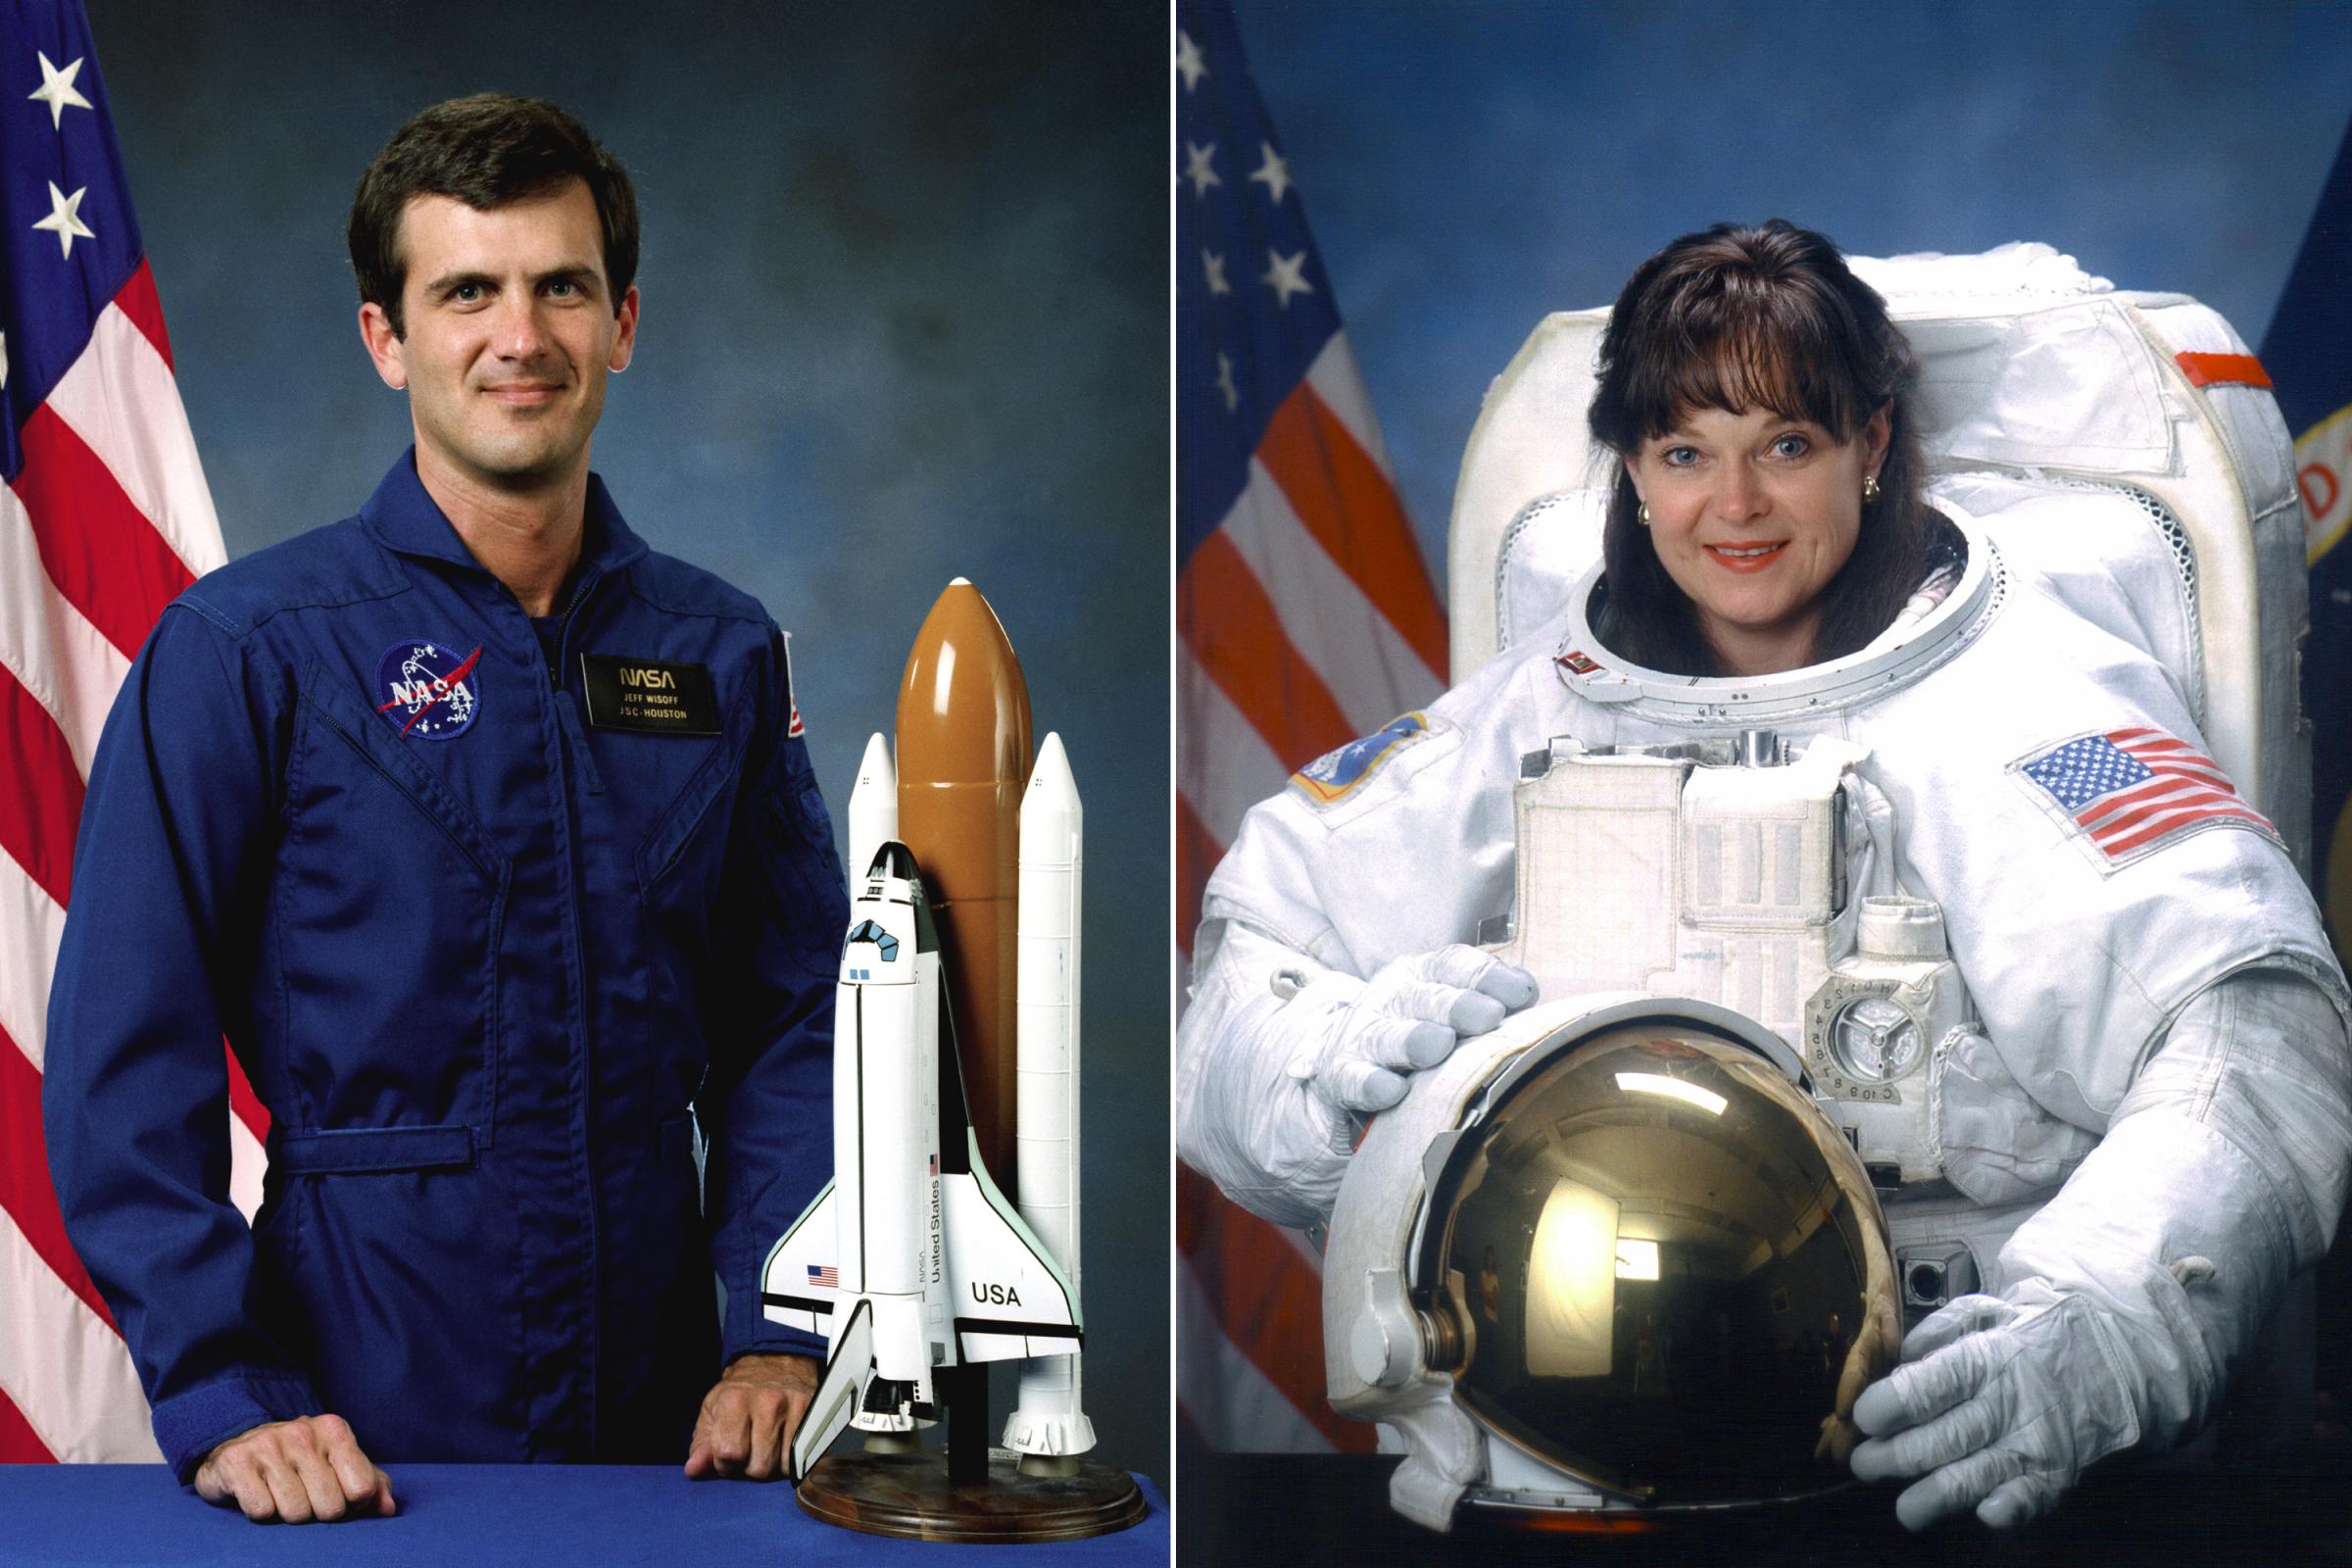 Peter Wisoff and Tammy Jernigan were married in 1999. Wisoff is a veteran of 4 space flights, including the STS-57 Endeavour mission in 1993. Jernigan is a veteran of 5 space flights, including the STS-96 Discovery mission in 1999, during which the crew performed the first docking to the International Space Station.